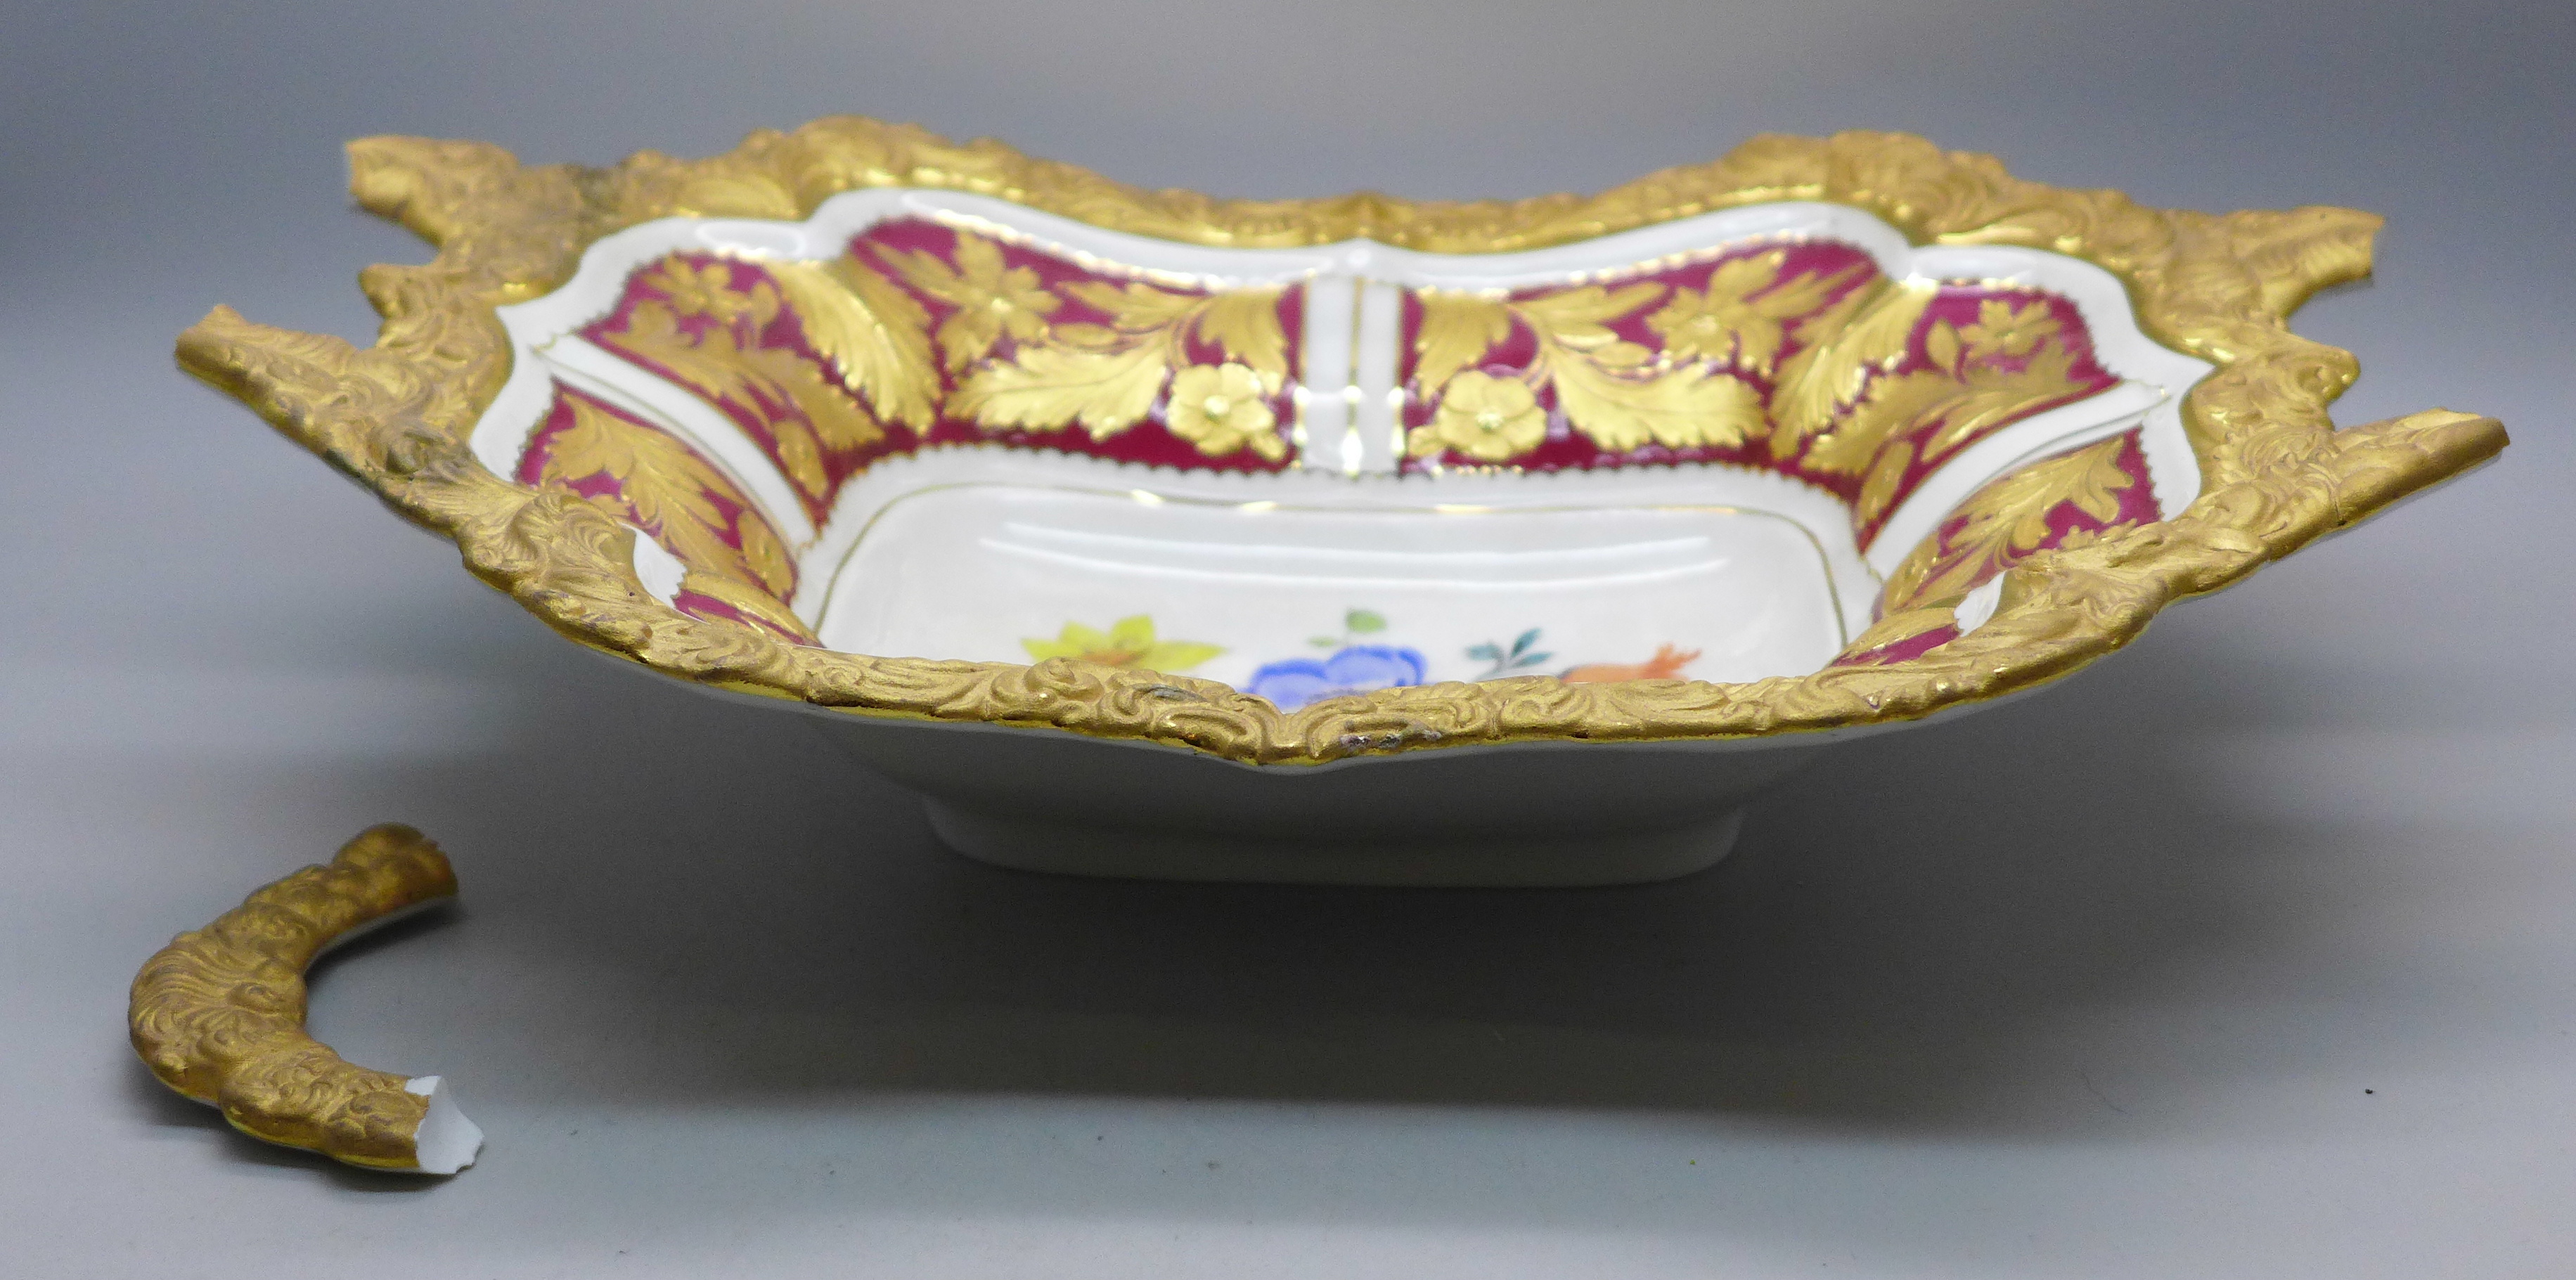 A Meissen ceremonial centrepiece/bowl, rectangular shape, heavily gilded, handles broken and only